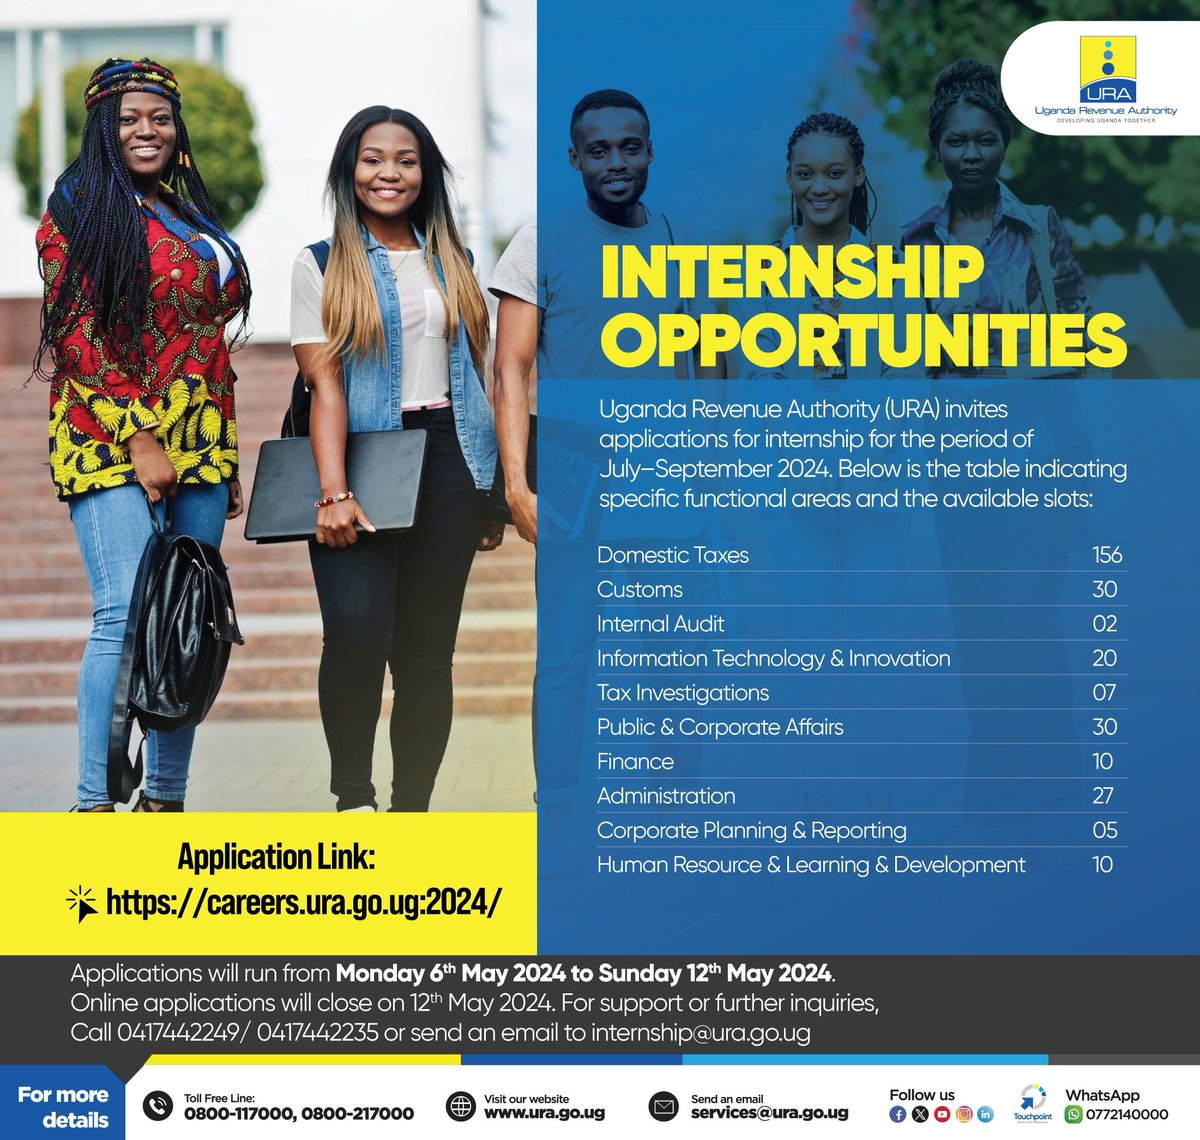 Hello Gallantry,
URA has over 287 internship slots up for grabs for the period of July-Sept, 2024. 
Applications are receivable starting Mon/6th/05, 2024 to Sun 12th/05, 2024. 
Kindly utilize this opportunity 🙏 
Regards,
Basalirwa Jonathan.
President, Tax Society @TaxSocietyMAK